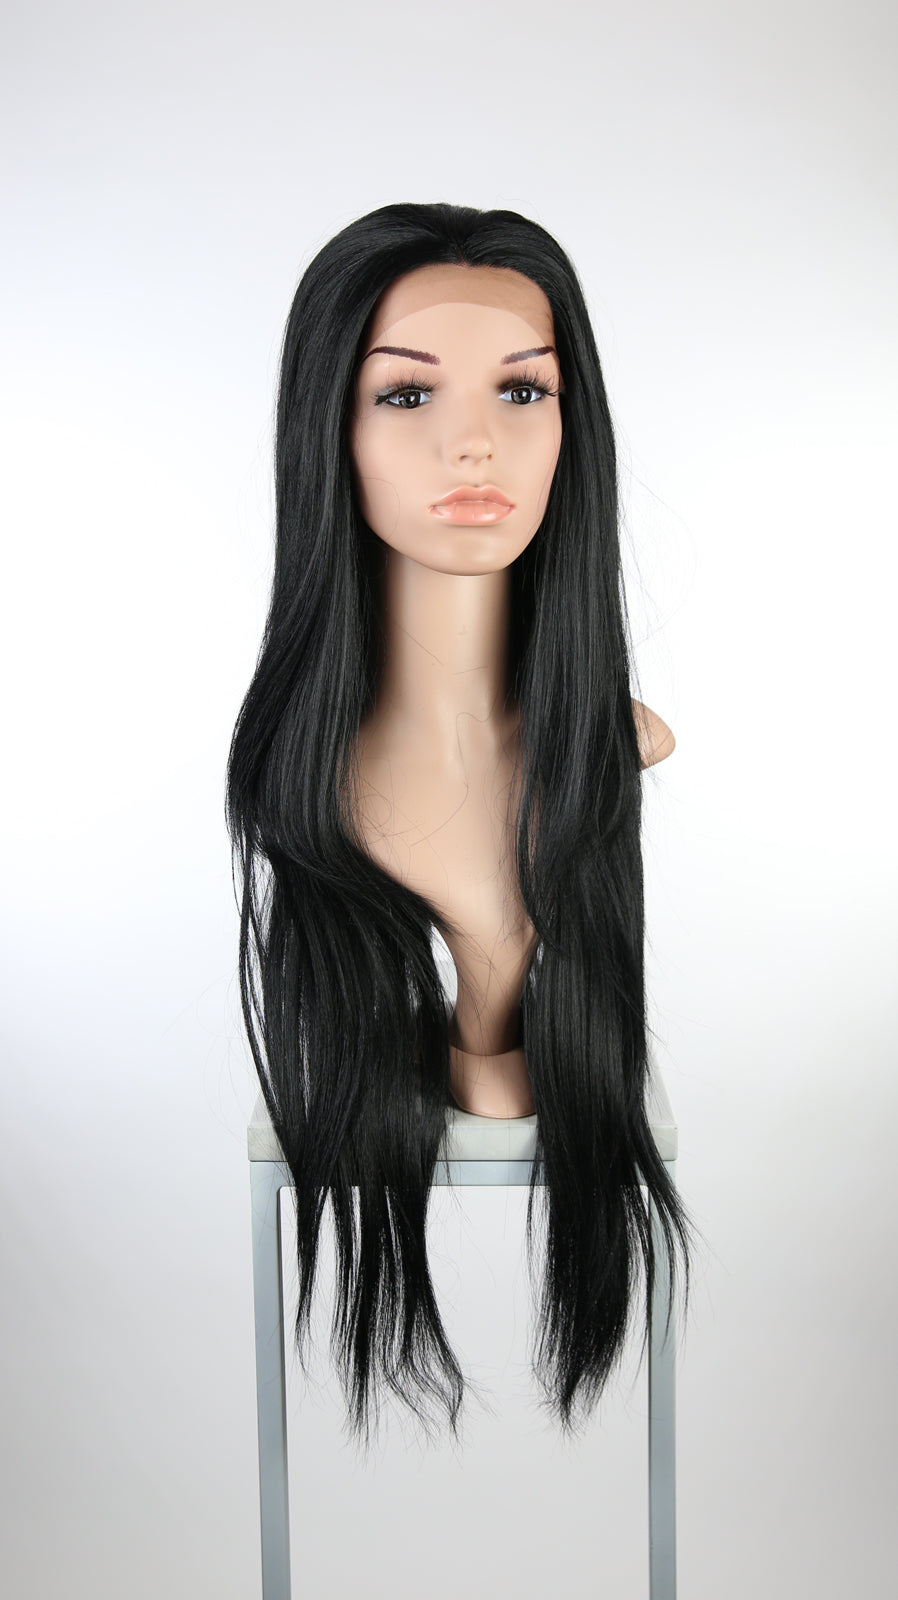 Black Long Straight Lace Front Wig - Lady Series LLHAW1